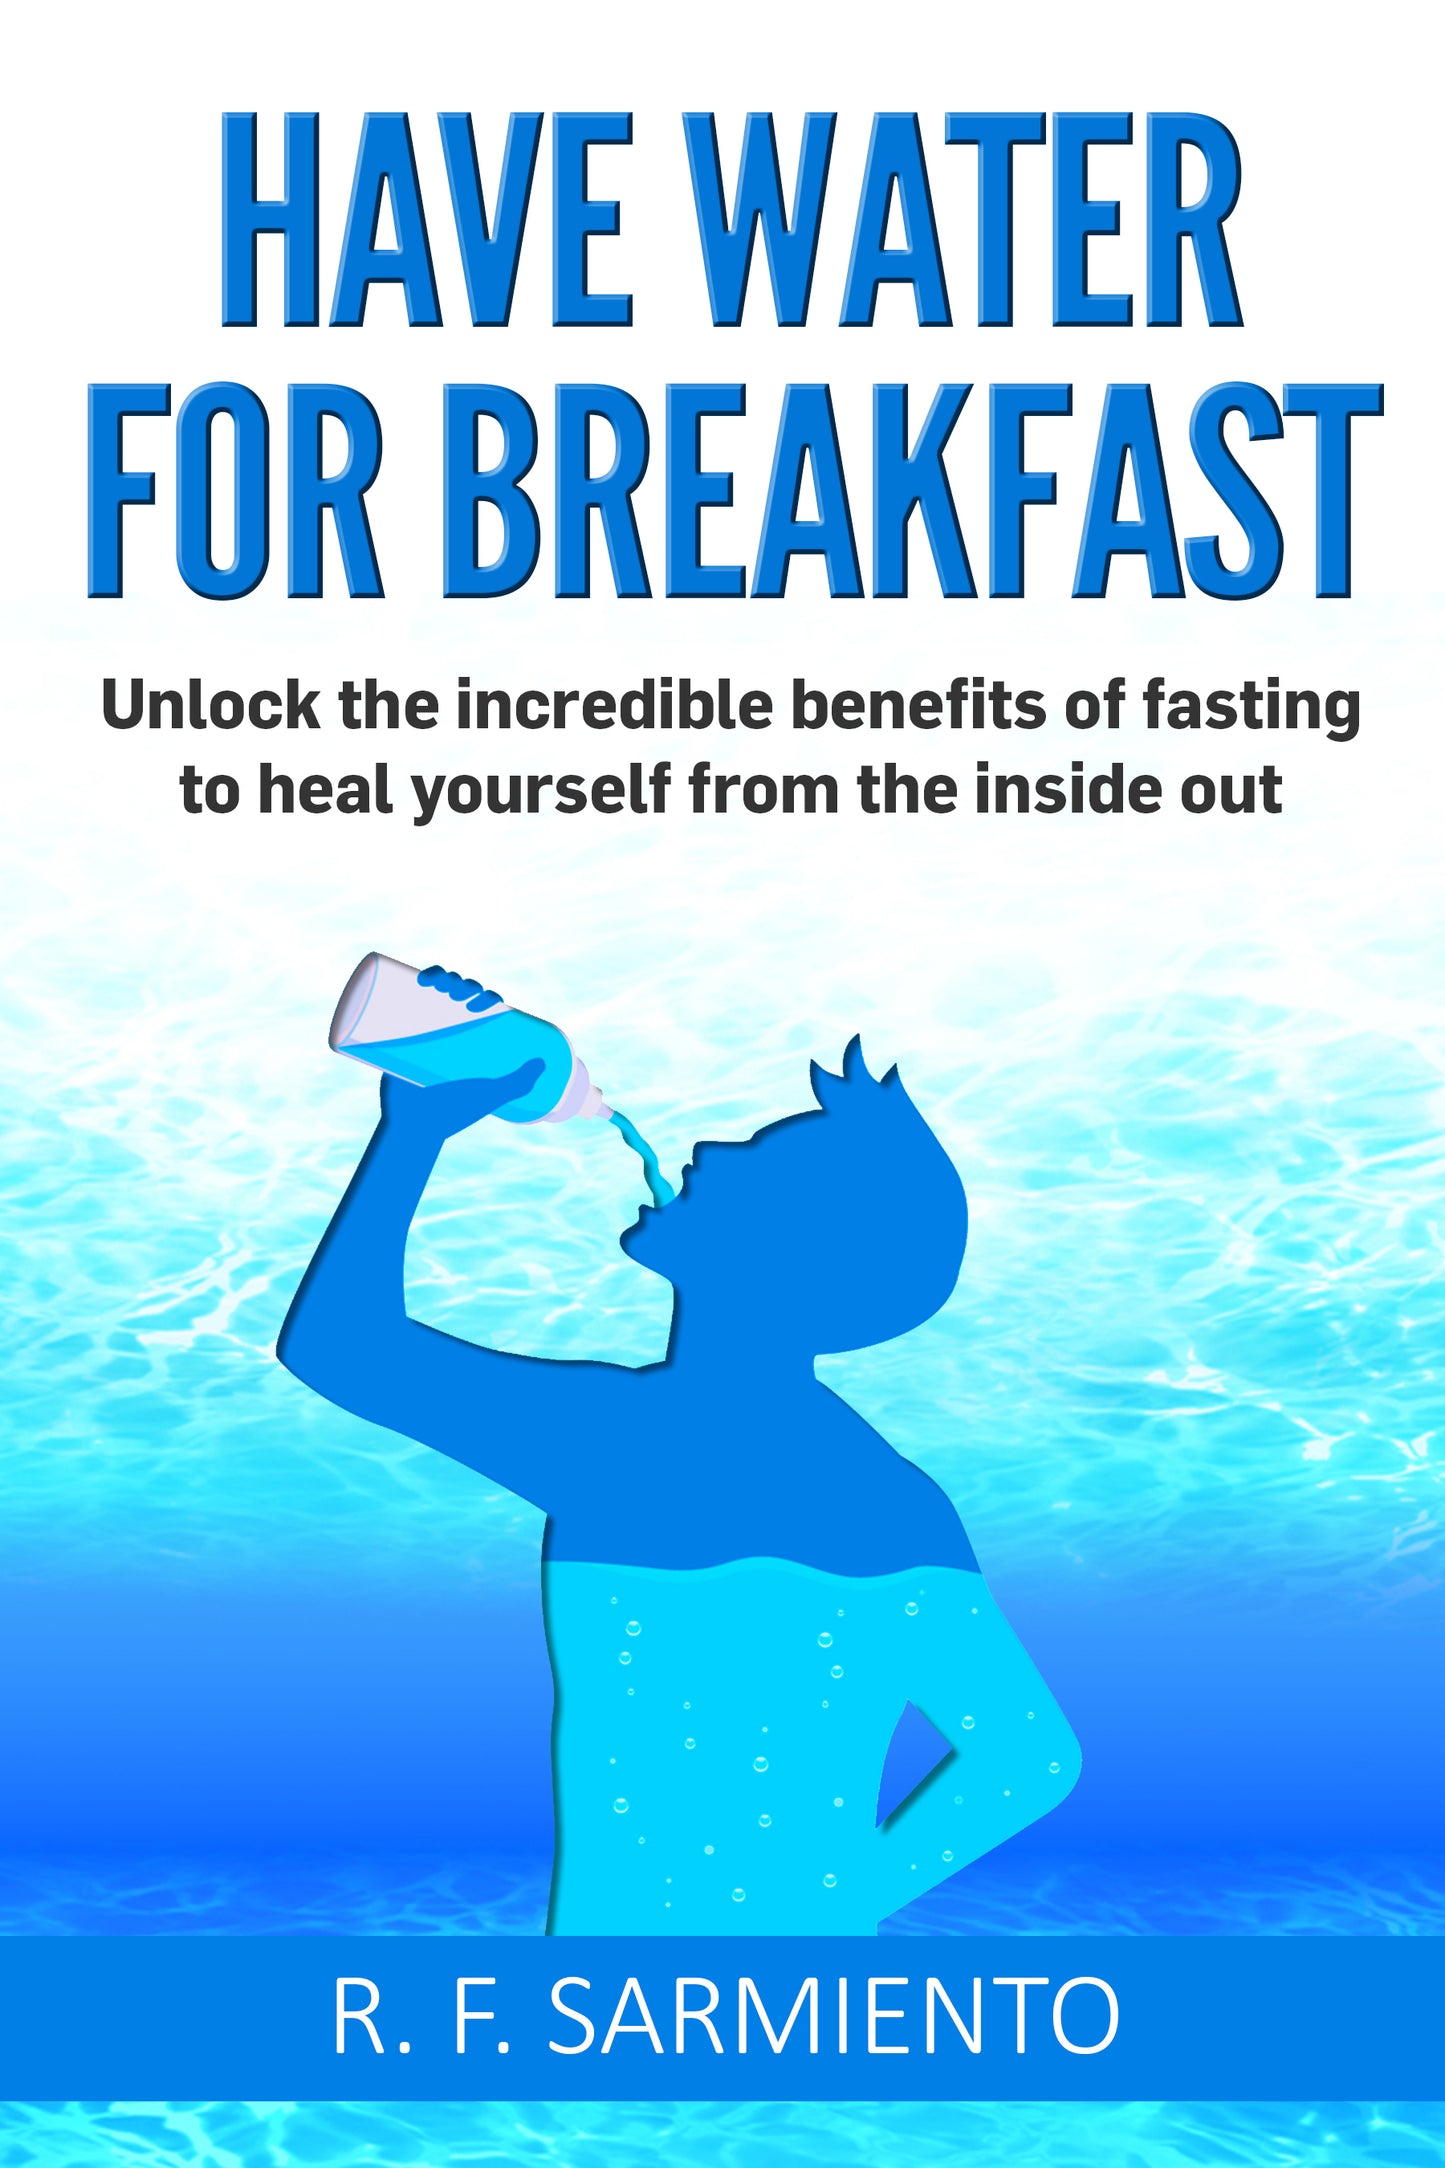 Have Water For Breakfast: Unlock the incredible benefits of fasting to heal yourself from the inside out